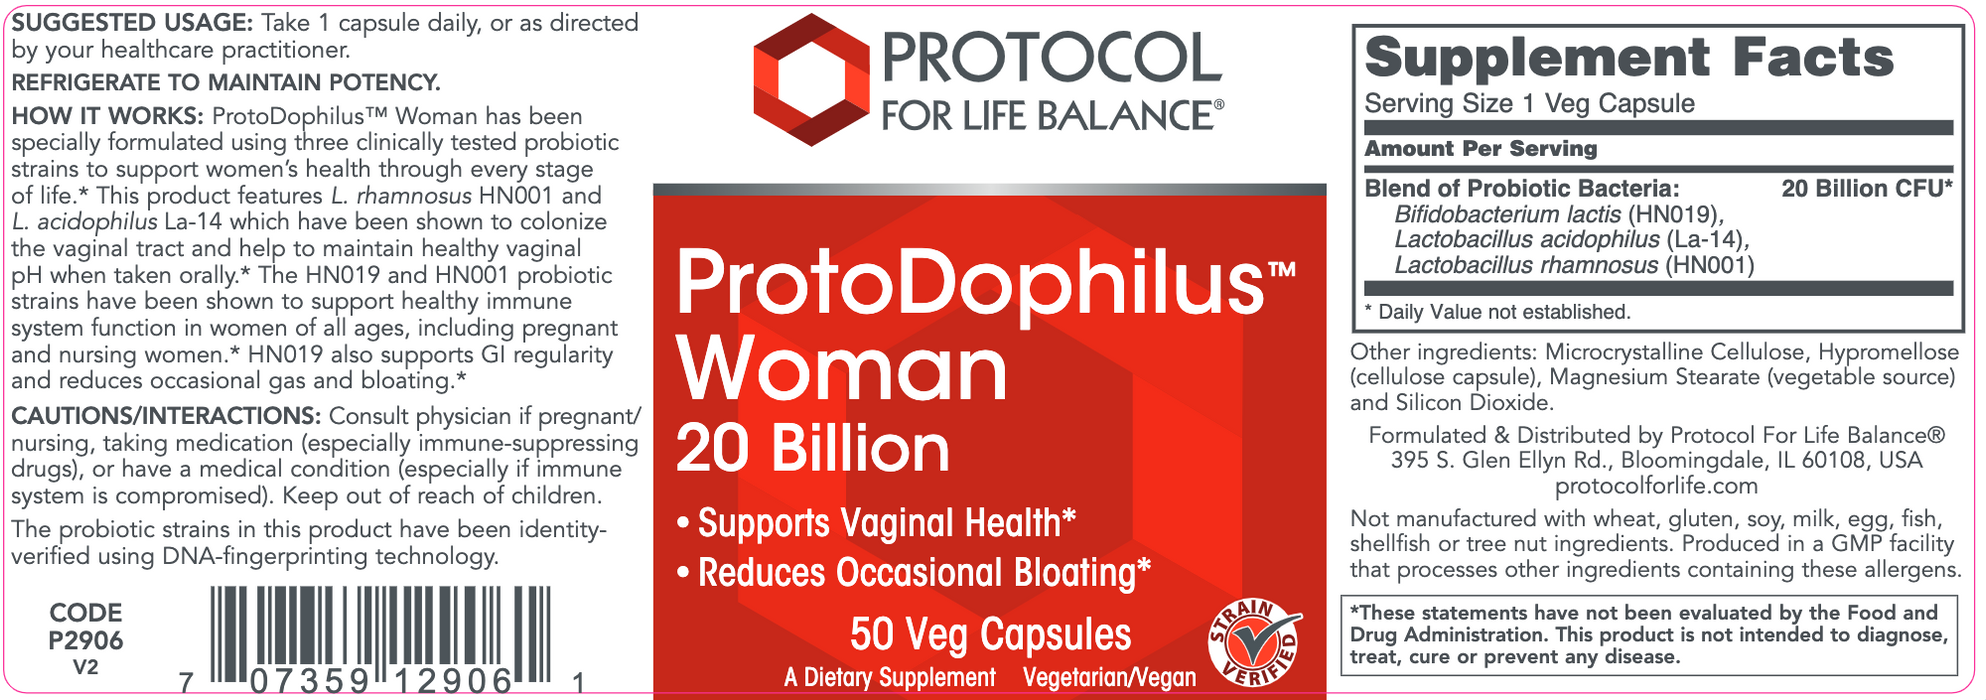 Protodophilus Woman (50 Capsules)-Vitamins & Supplements-Protocol For Life Balance-Pine Street Clinic